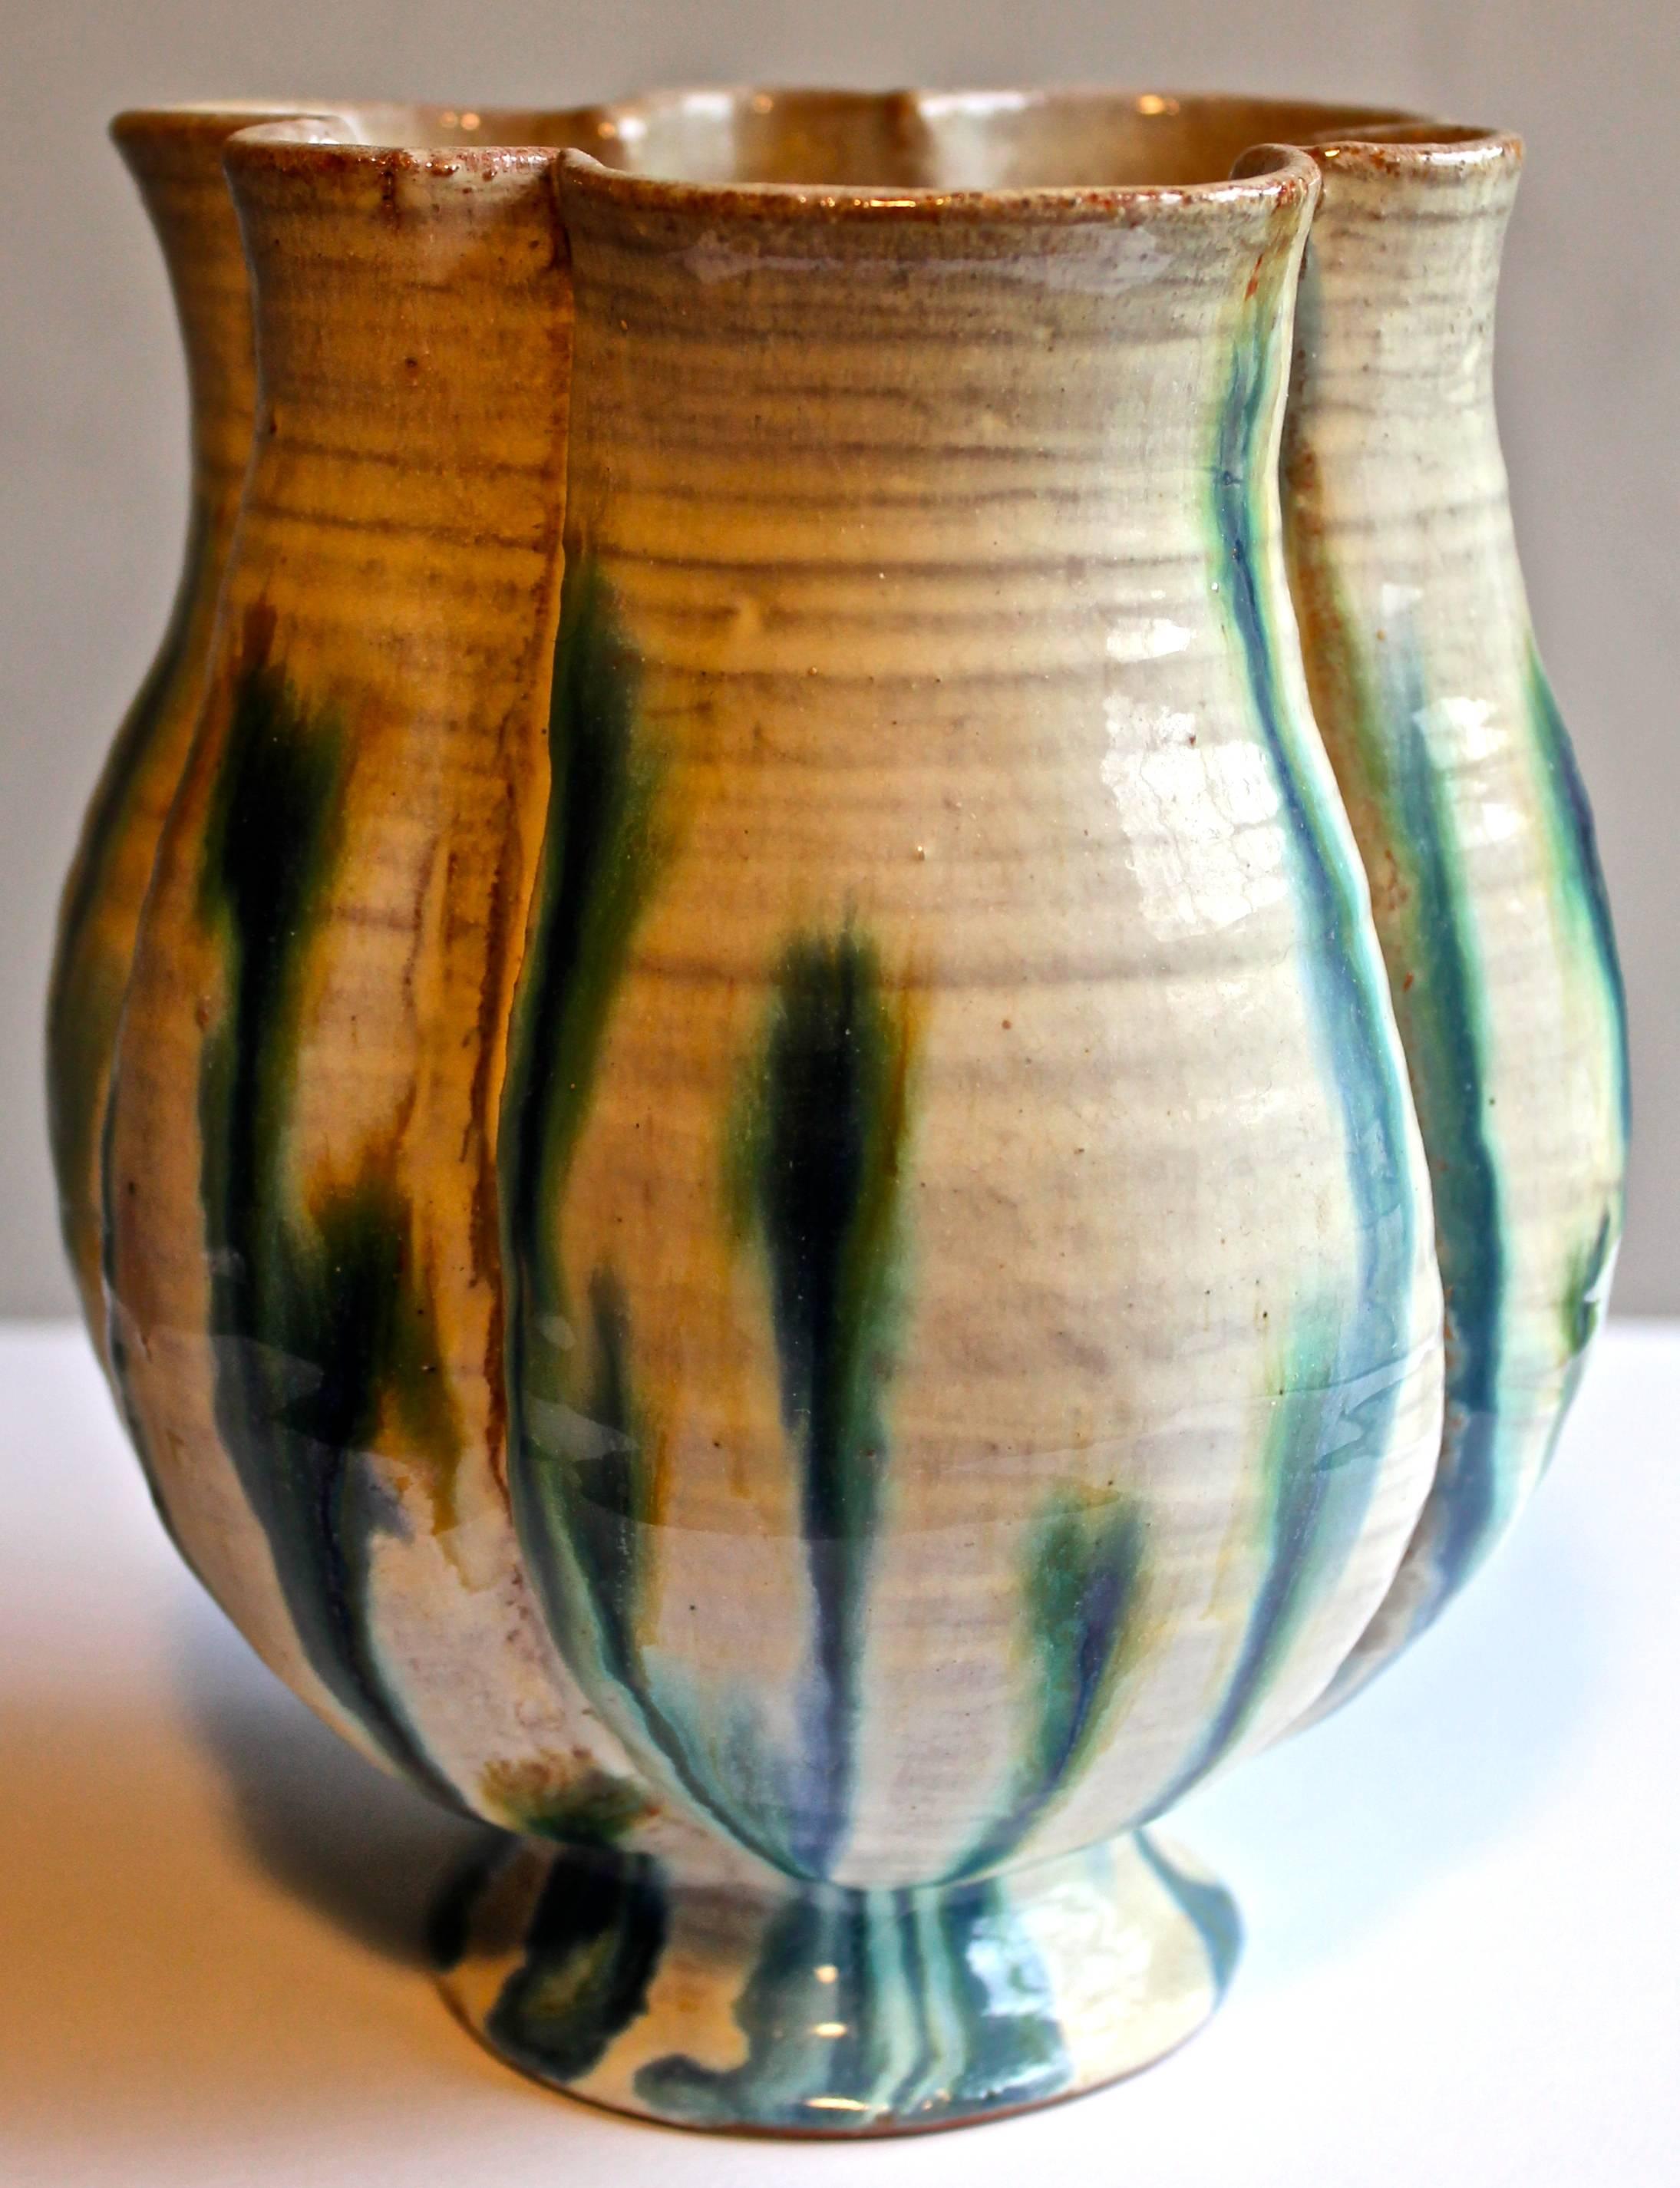 A very early vase executed while studying with Michael Powolny at the Kunstgewerbeschule. Though Lucie Gomperz was not actually a member of the Wiener Werkstatte, Josef Hoffmann exhibited her works with the WW.  These early works were ceramic